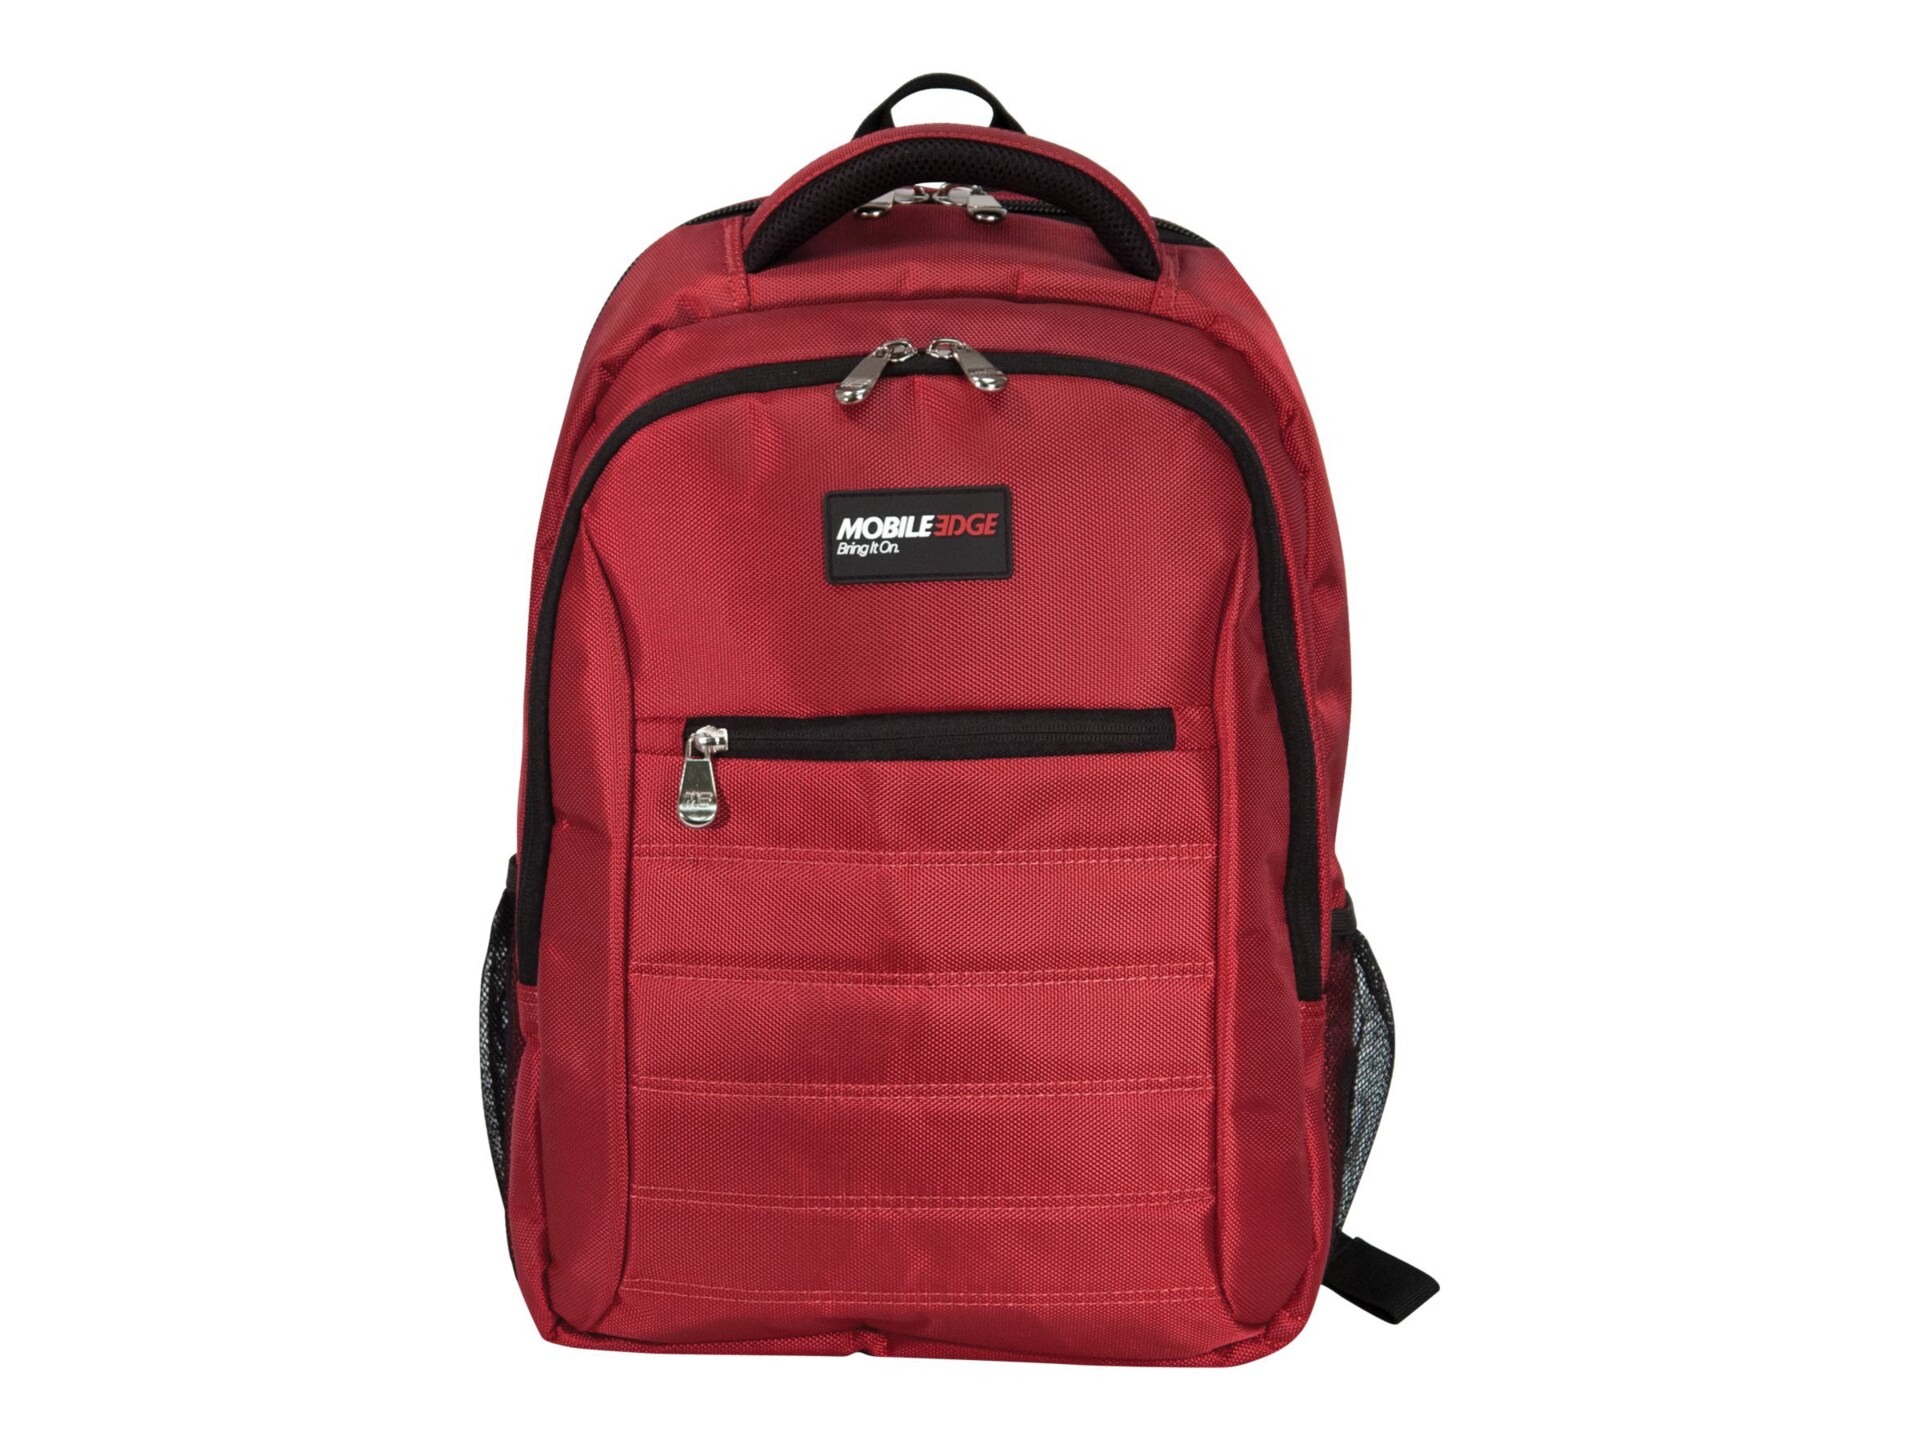 Mobile Edge notebook carrying backpack